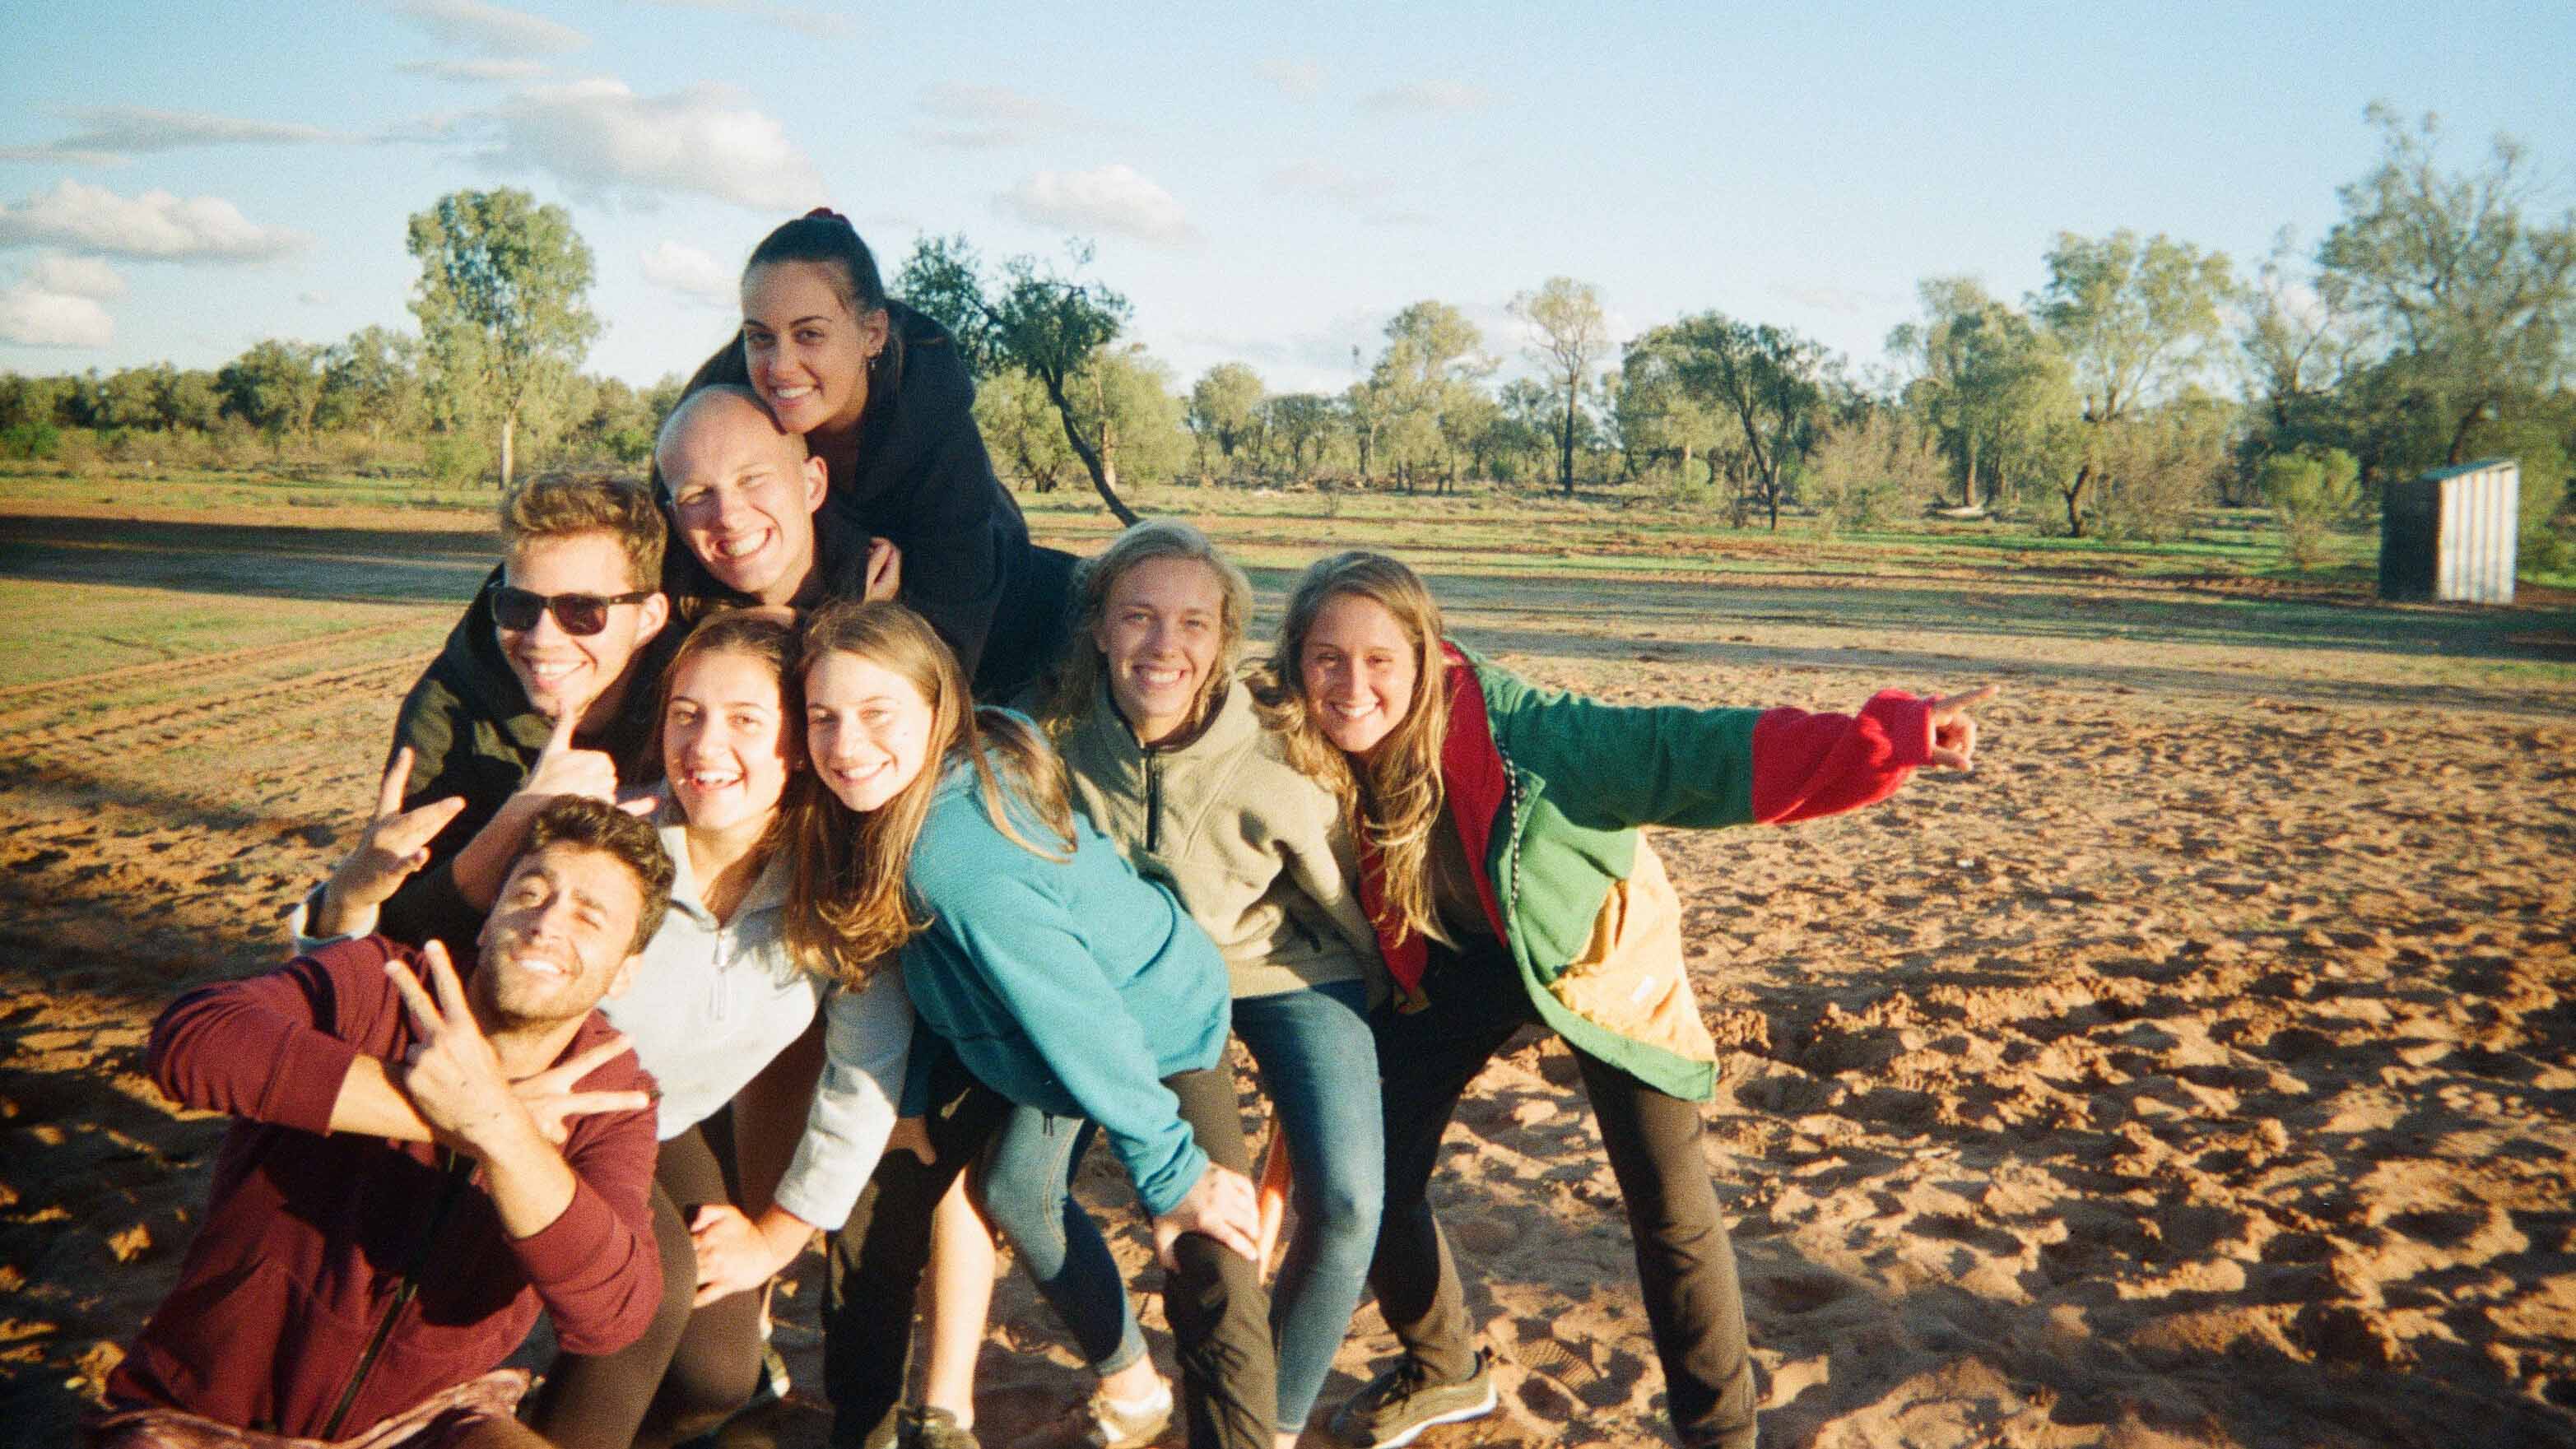 Group of students hugging on a sand beach with trees in the back